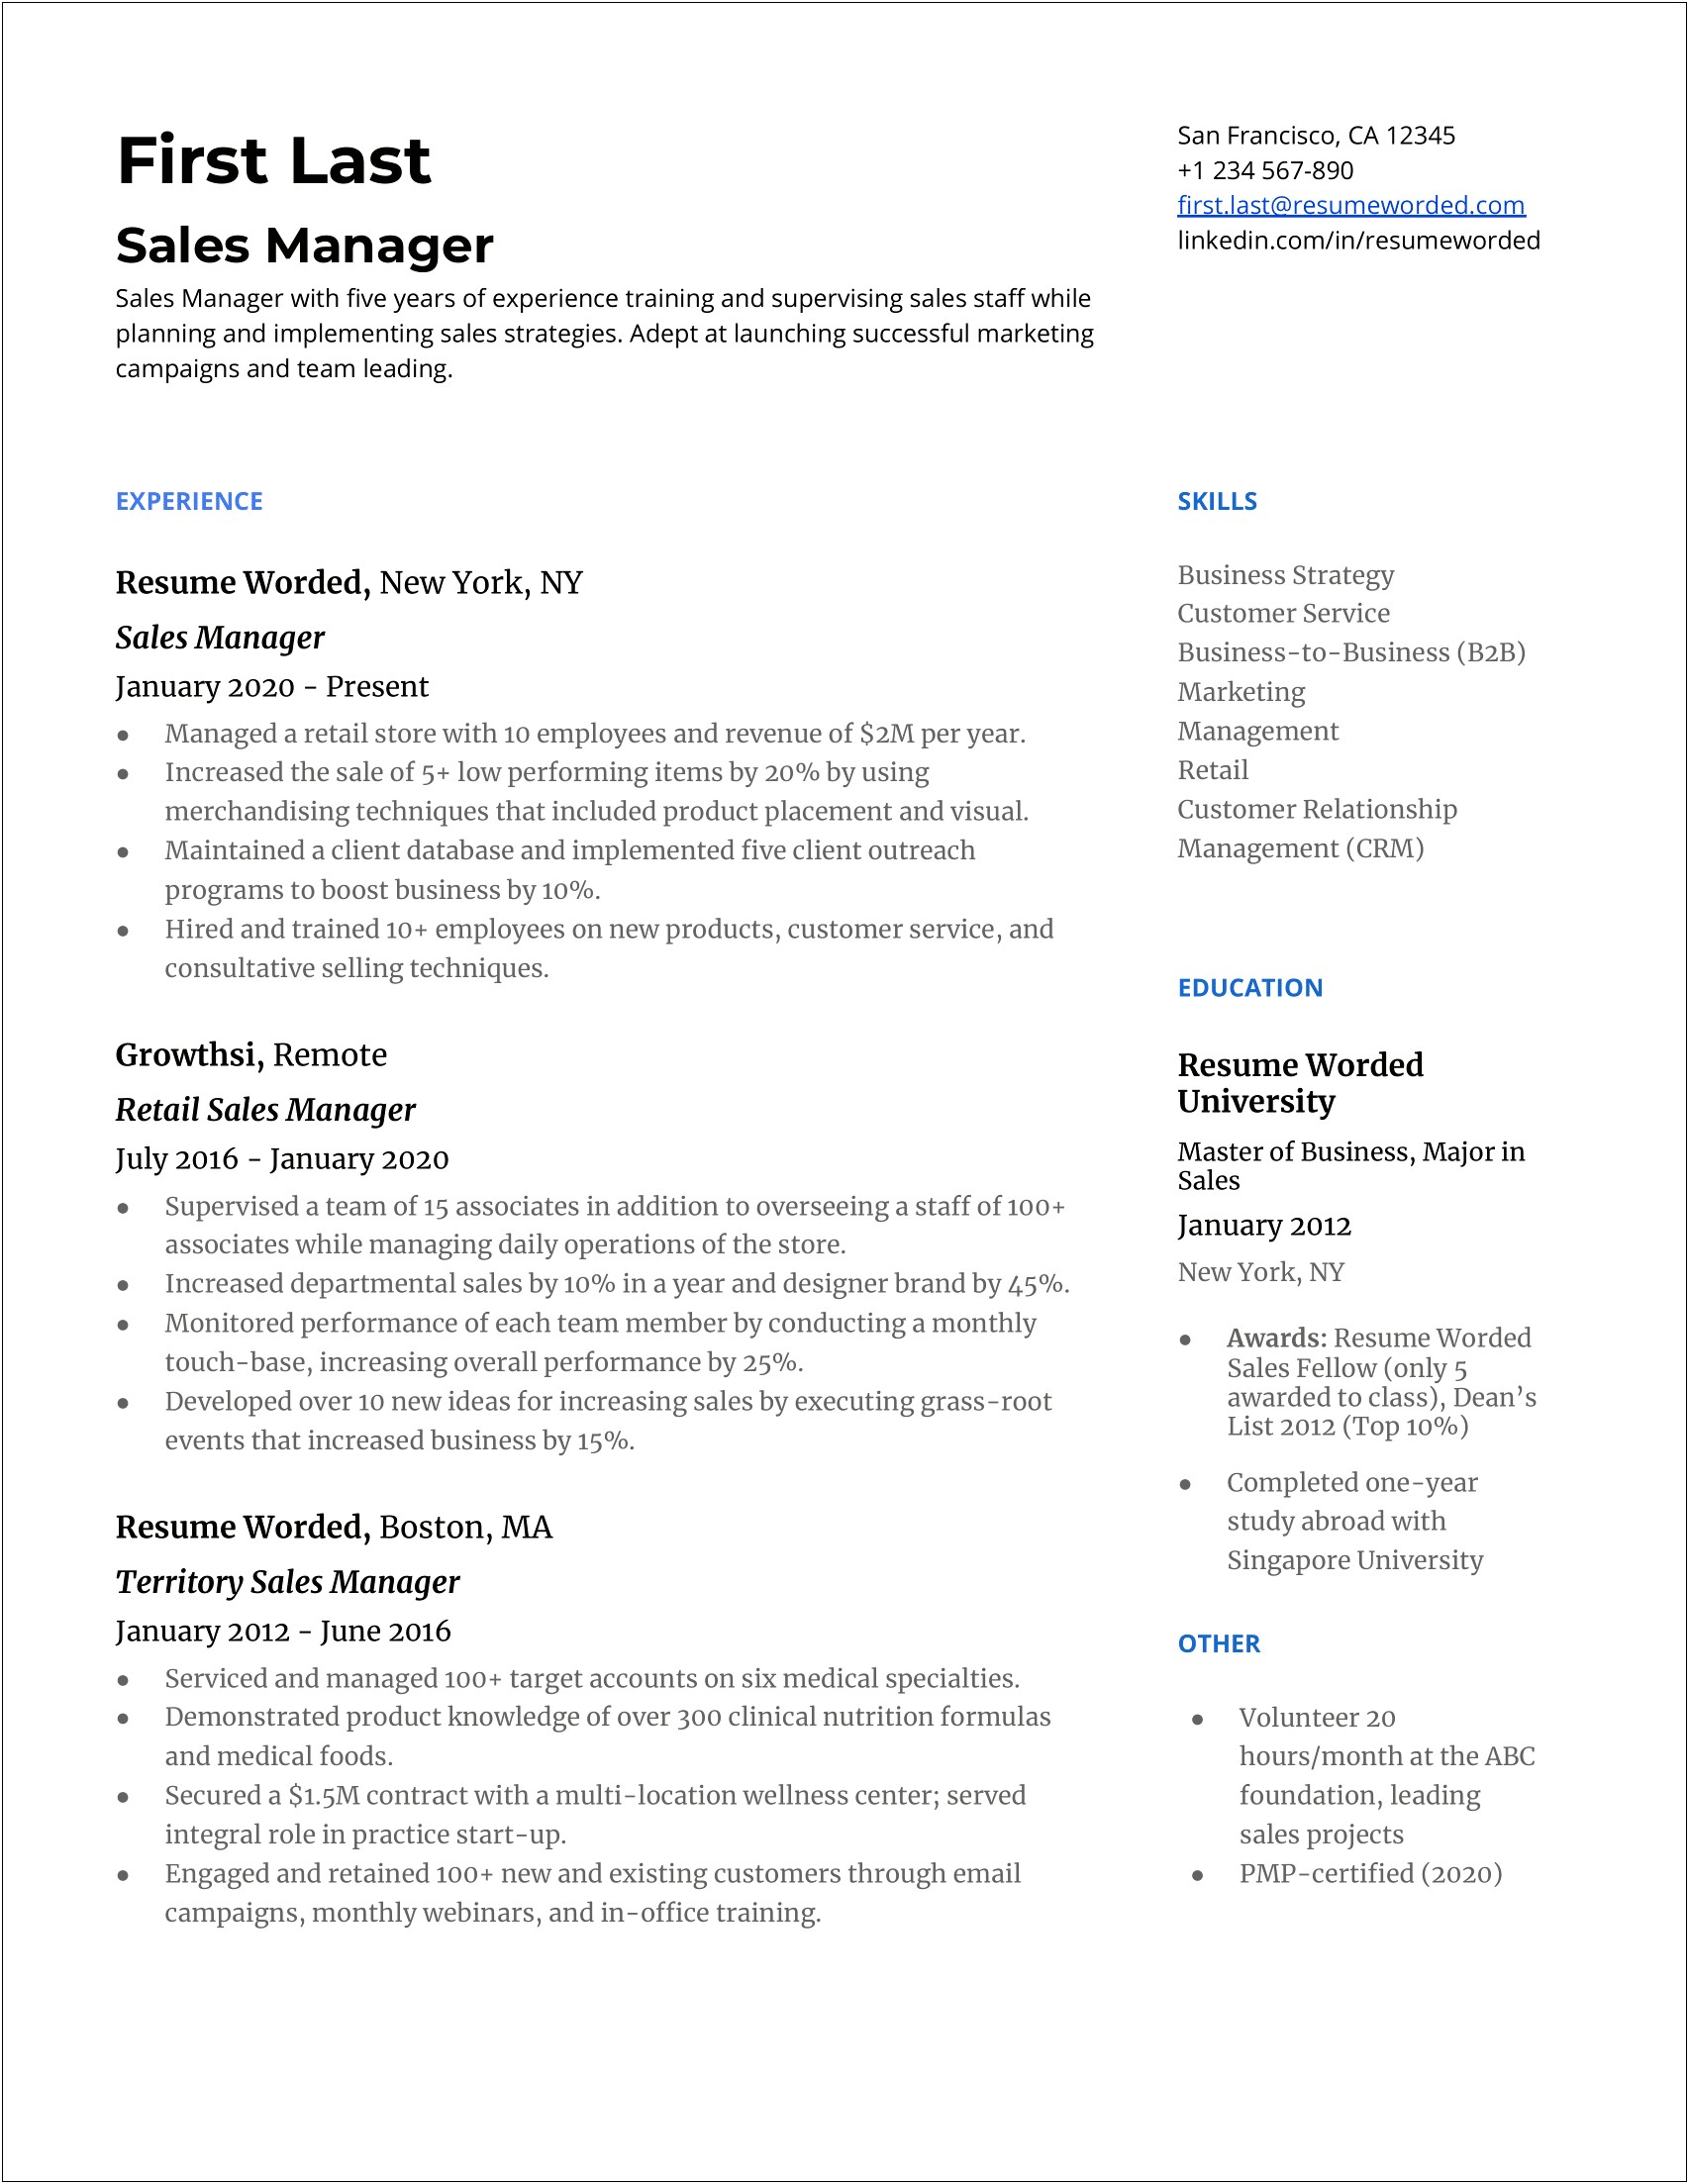 Financial Due Diligence Manager Resume